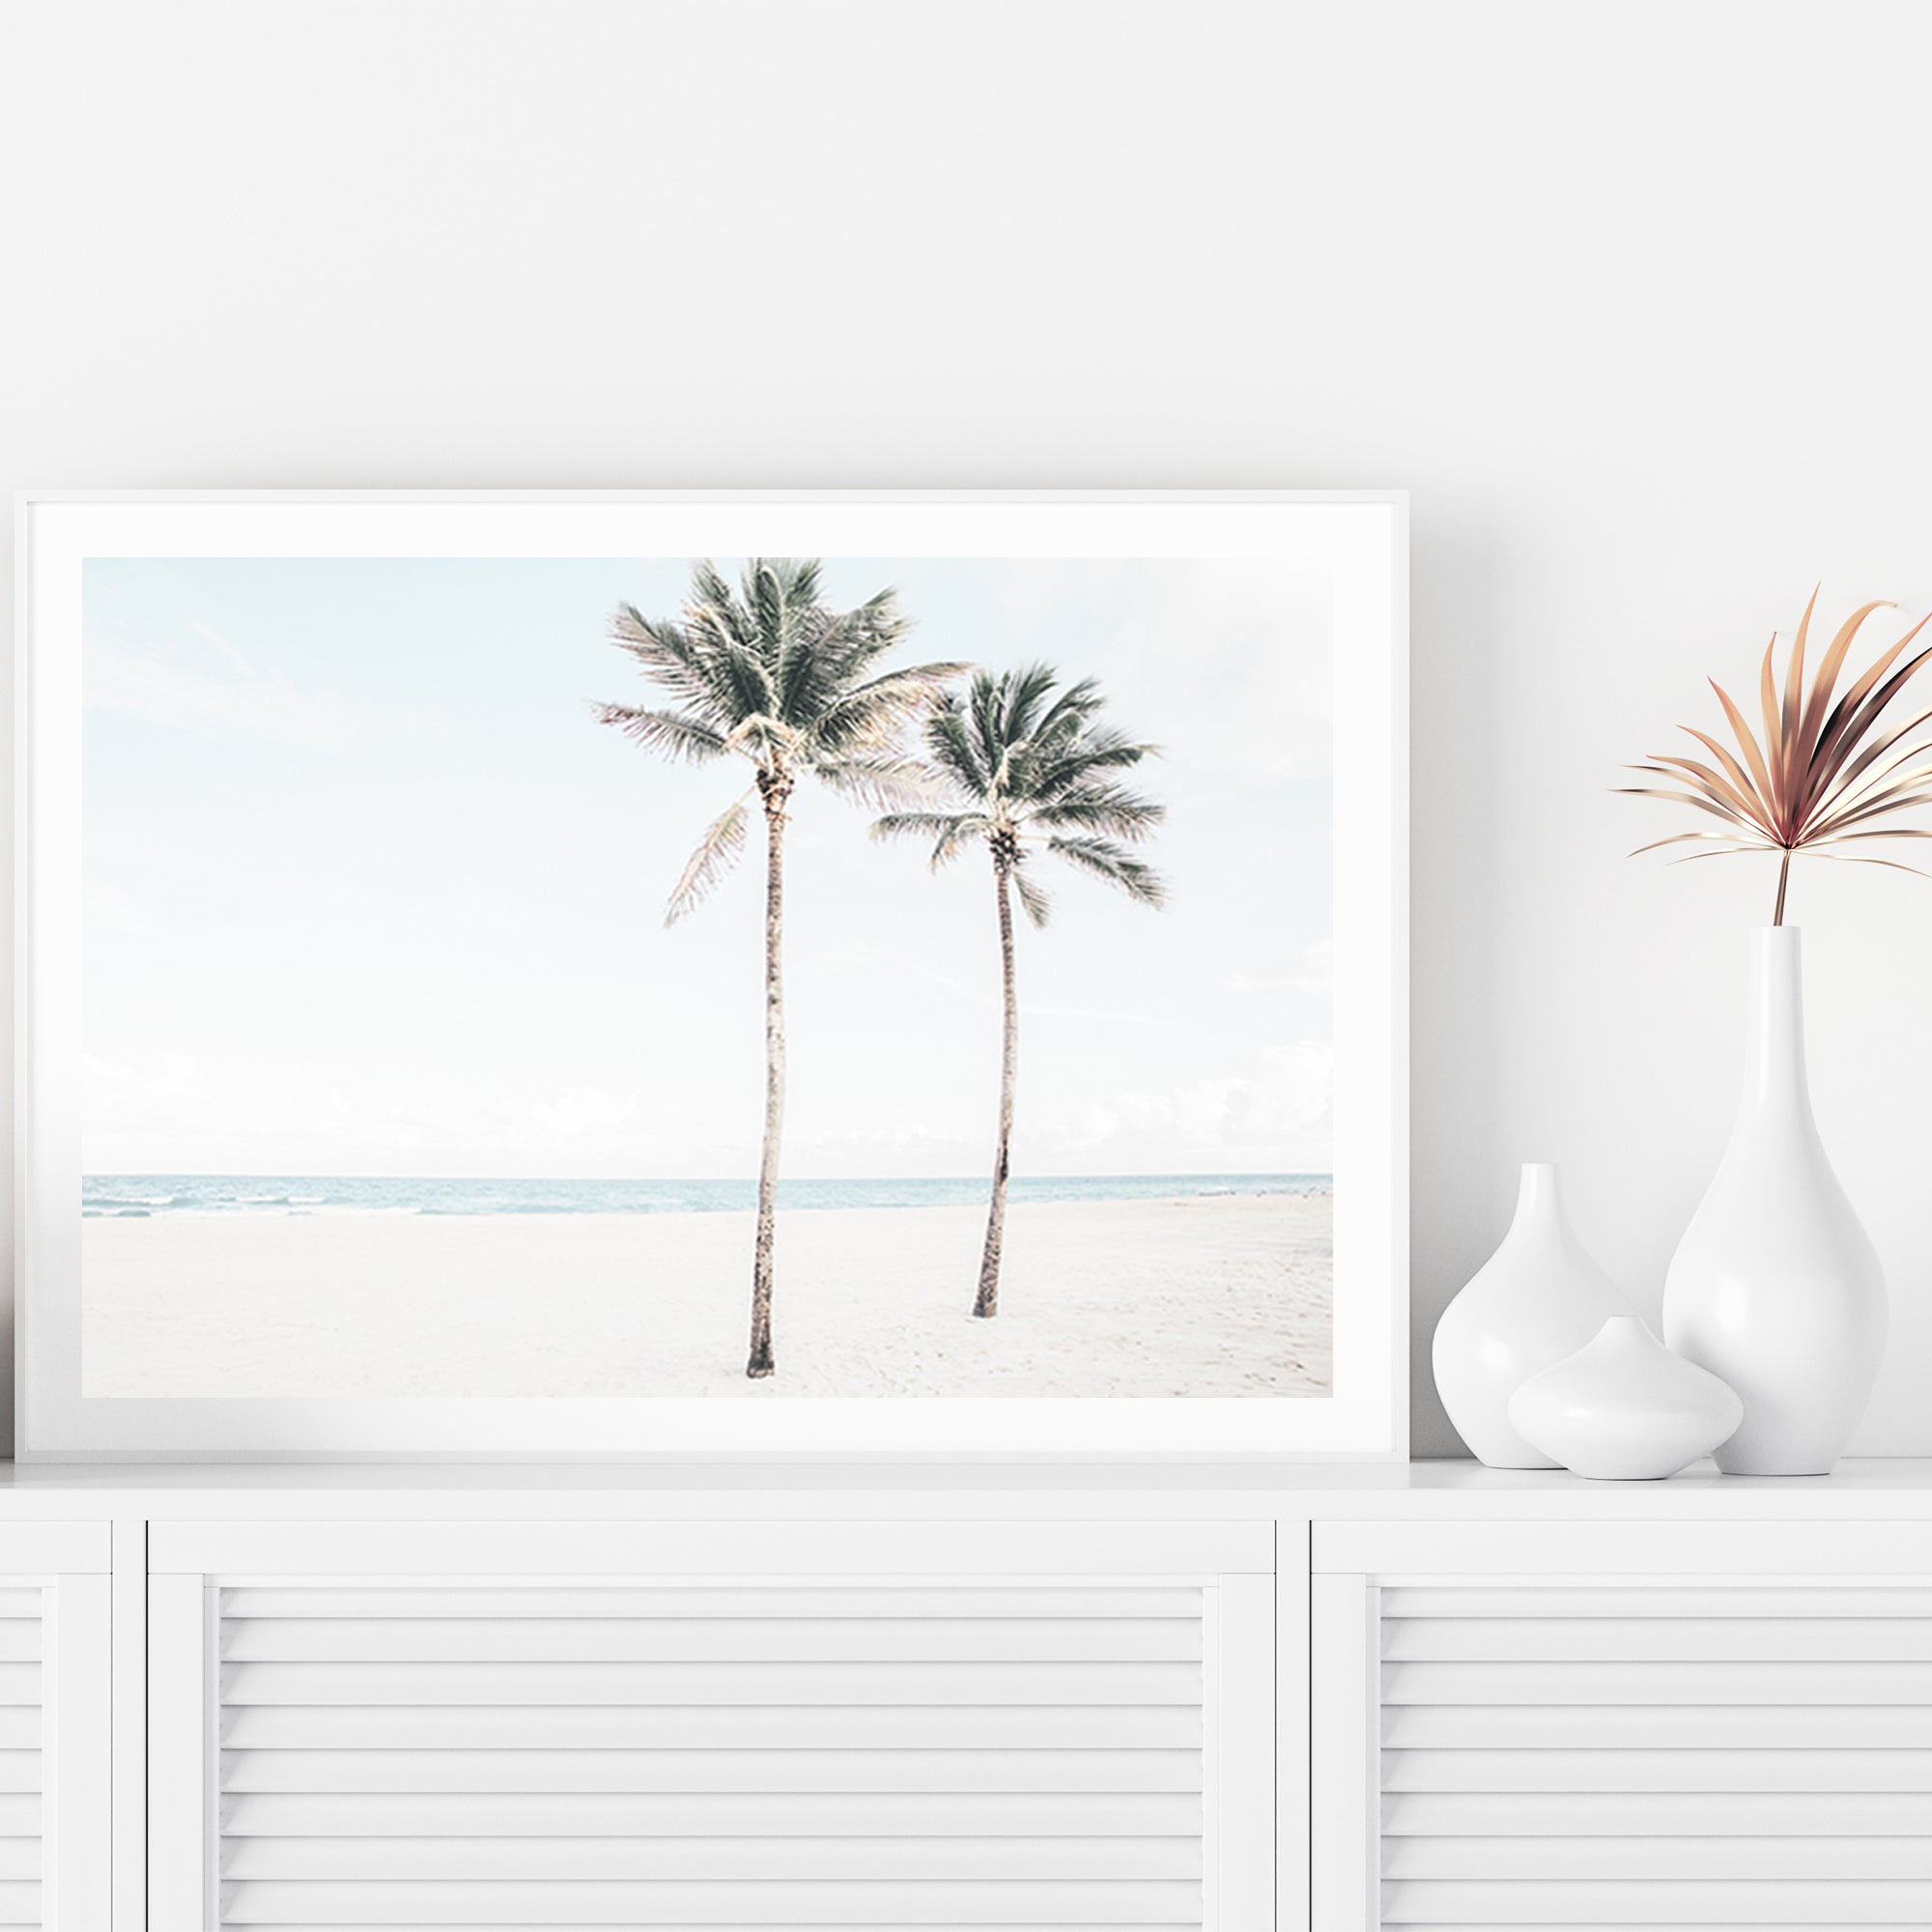 A stretched canvas Hamptons artwork of two palm trees and the beach, available unframed or timber, black or white frames.